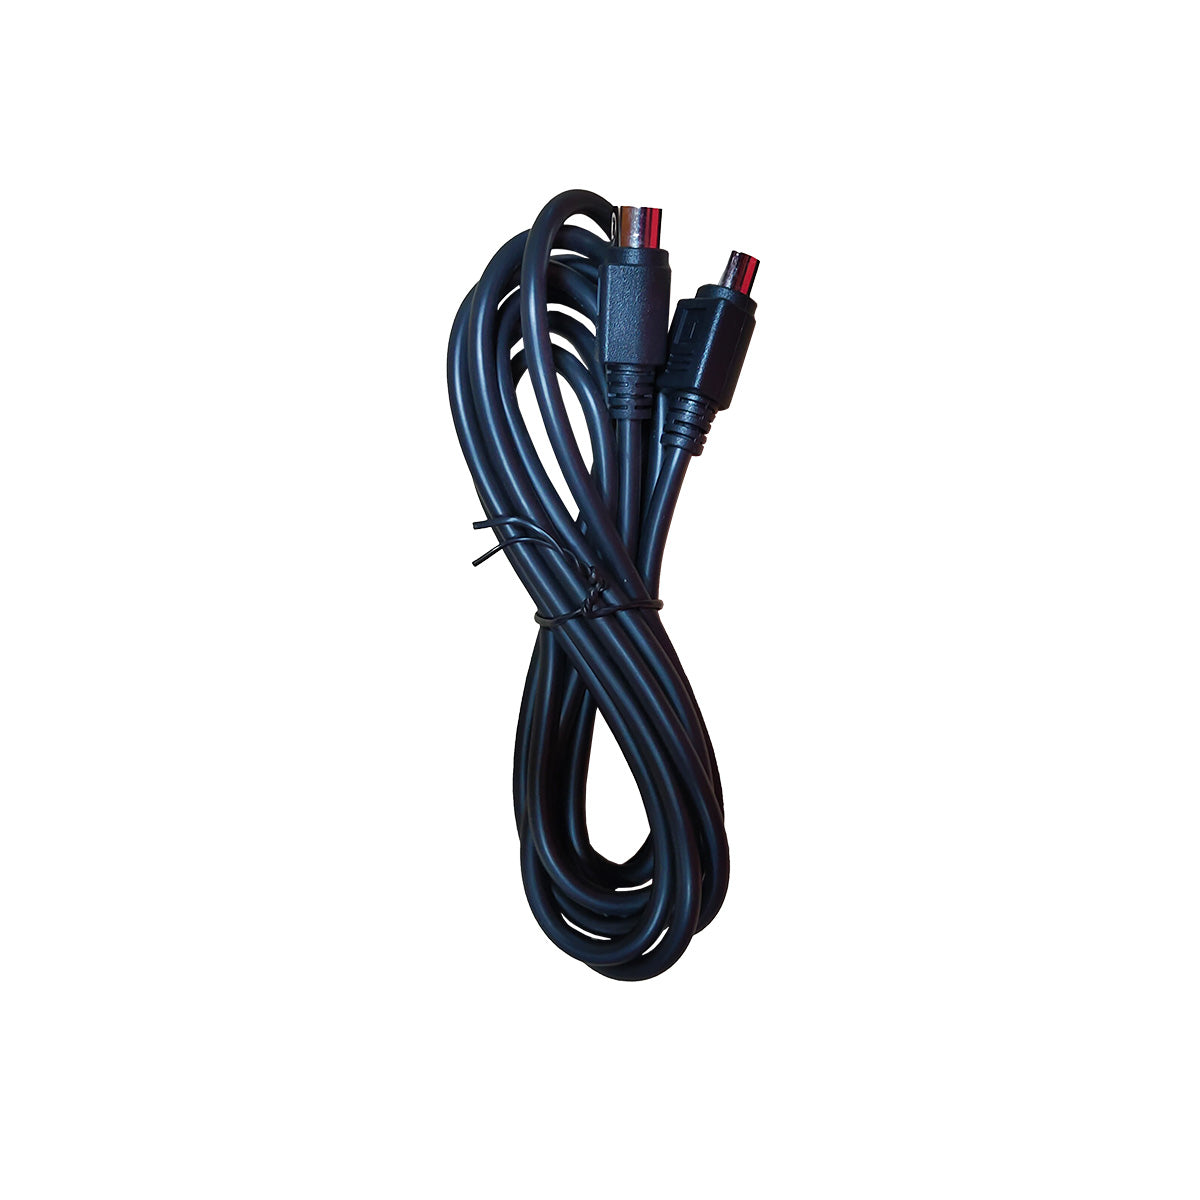 VULKKANO A5 ARC cable 3 meters